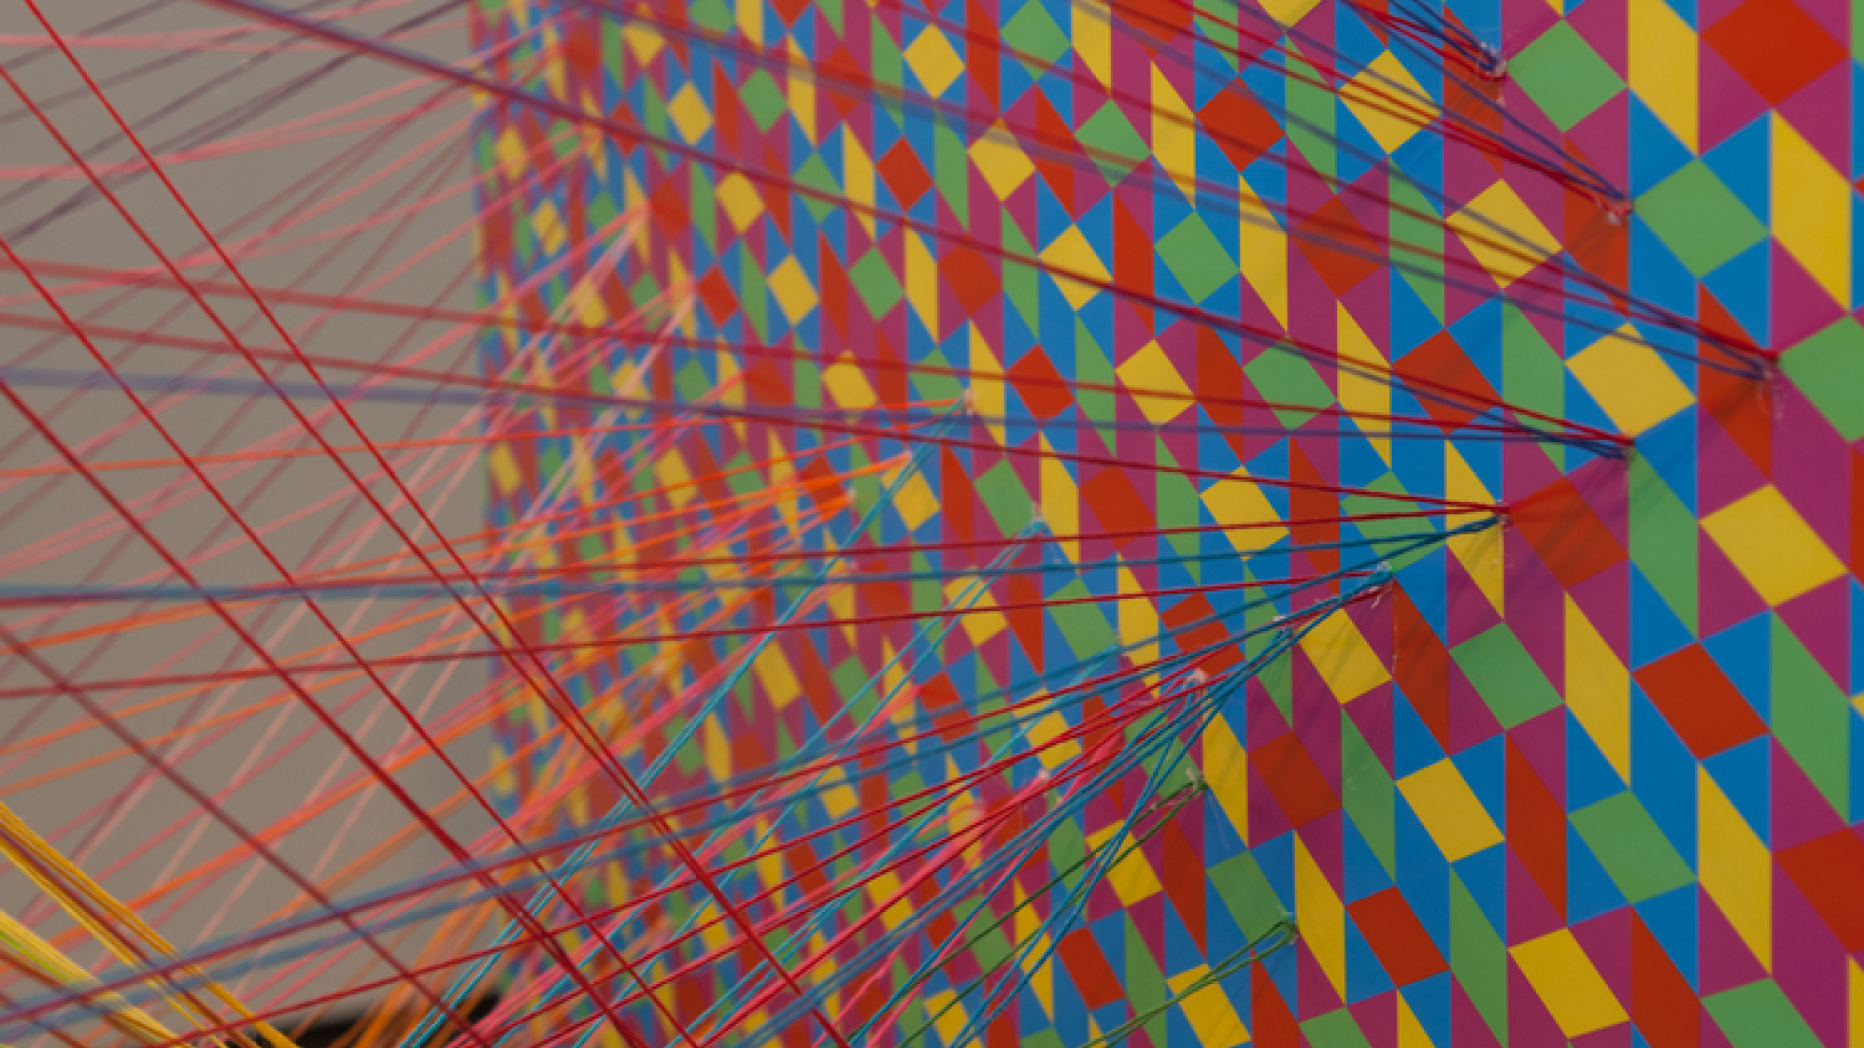 Art piece where multicolored yarn is attached to a board with colorful pattern. Yarn is suspended in space in a criss cross pattern similar to that on the board.